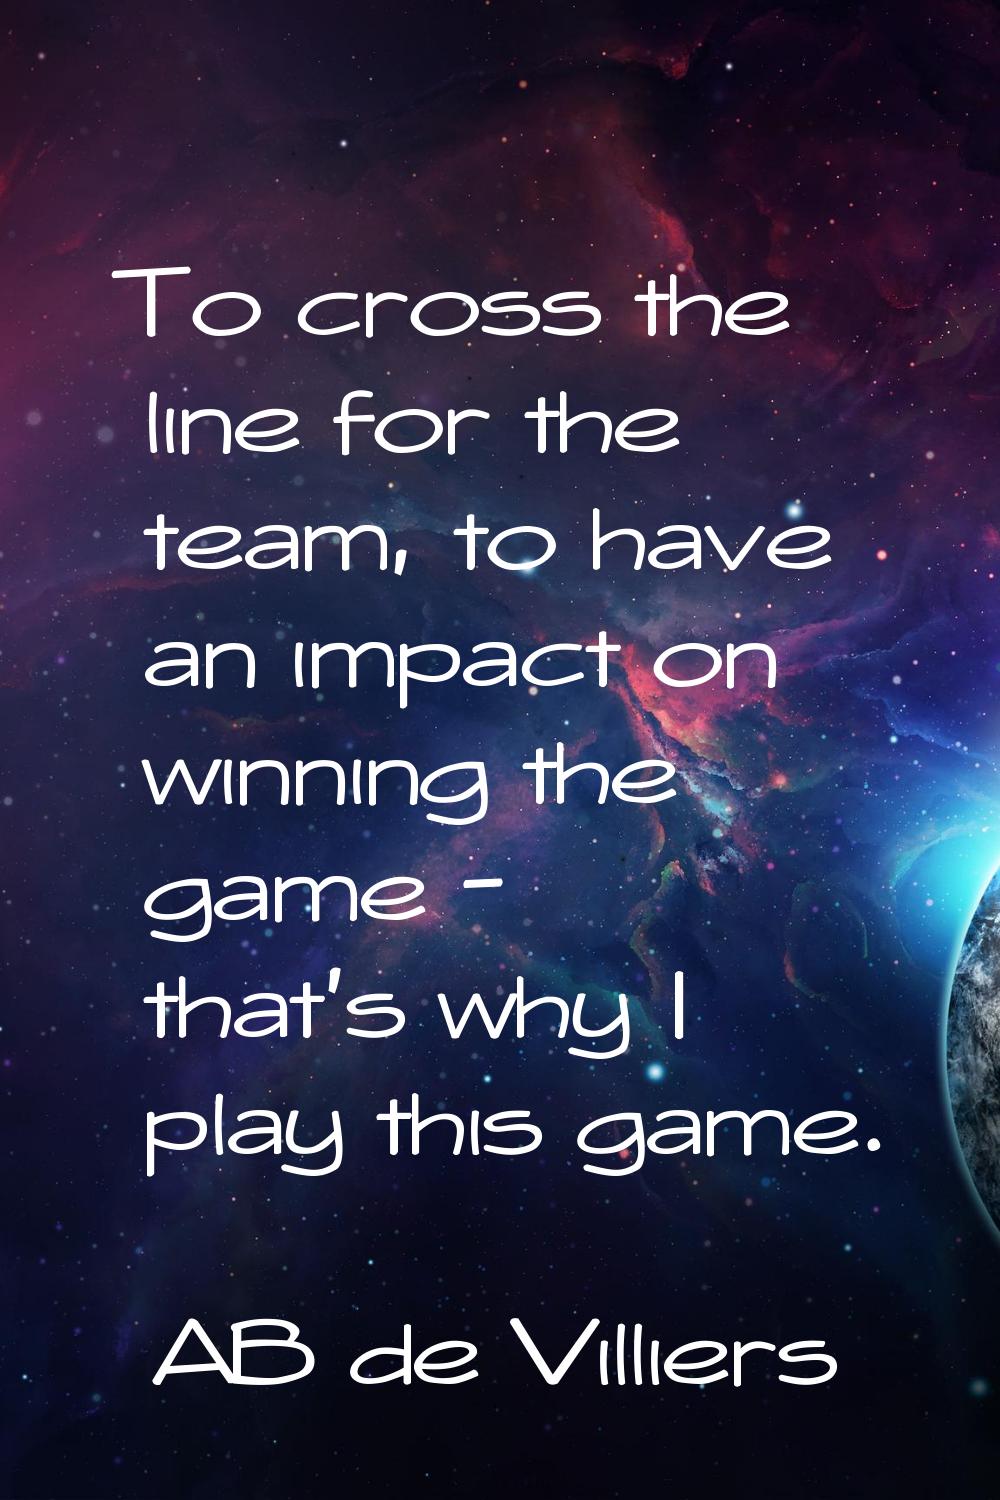 To cross the line for the team, to have an impact on winning the game - that's why I play this game